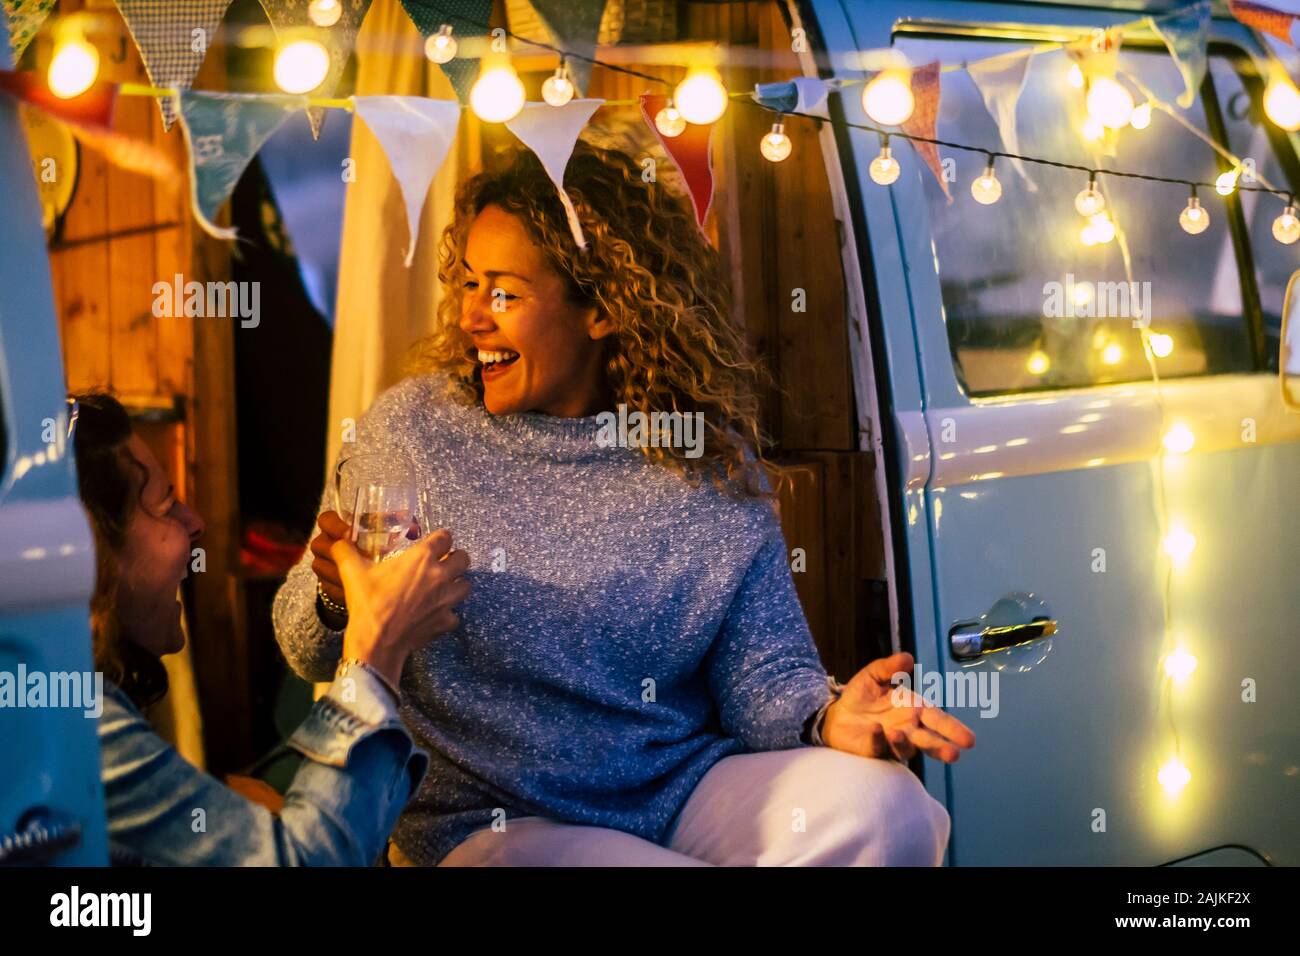 Alternative travel and celebration concept with couple of people adult cheerful happy women celebrate together in a vintage van camper  and party ligh Stock Photo